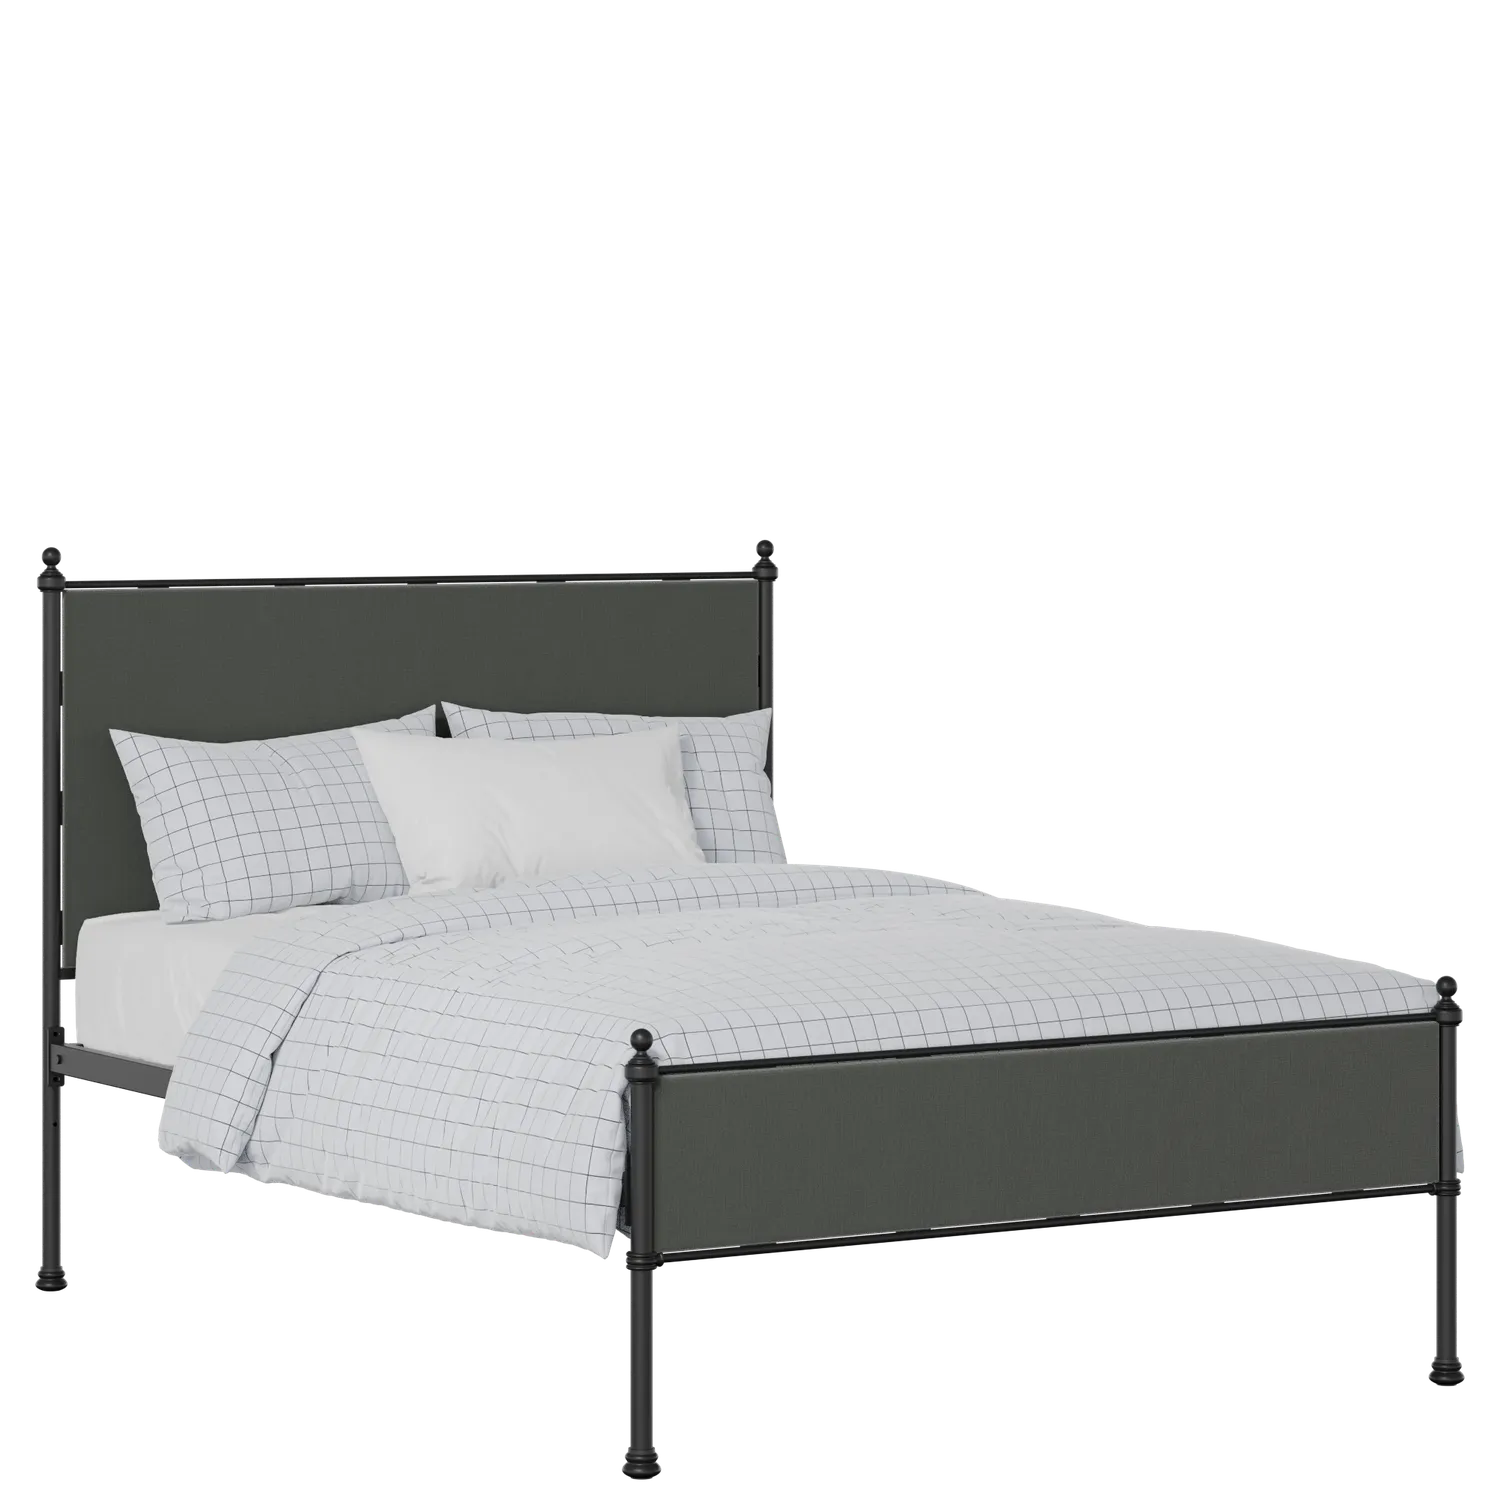 Neville Slim iron/metal upholstered bed in black with iron fabric